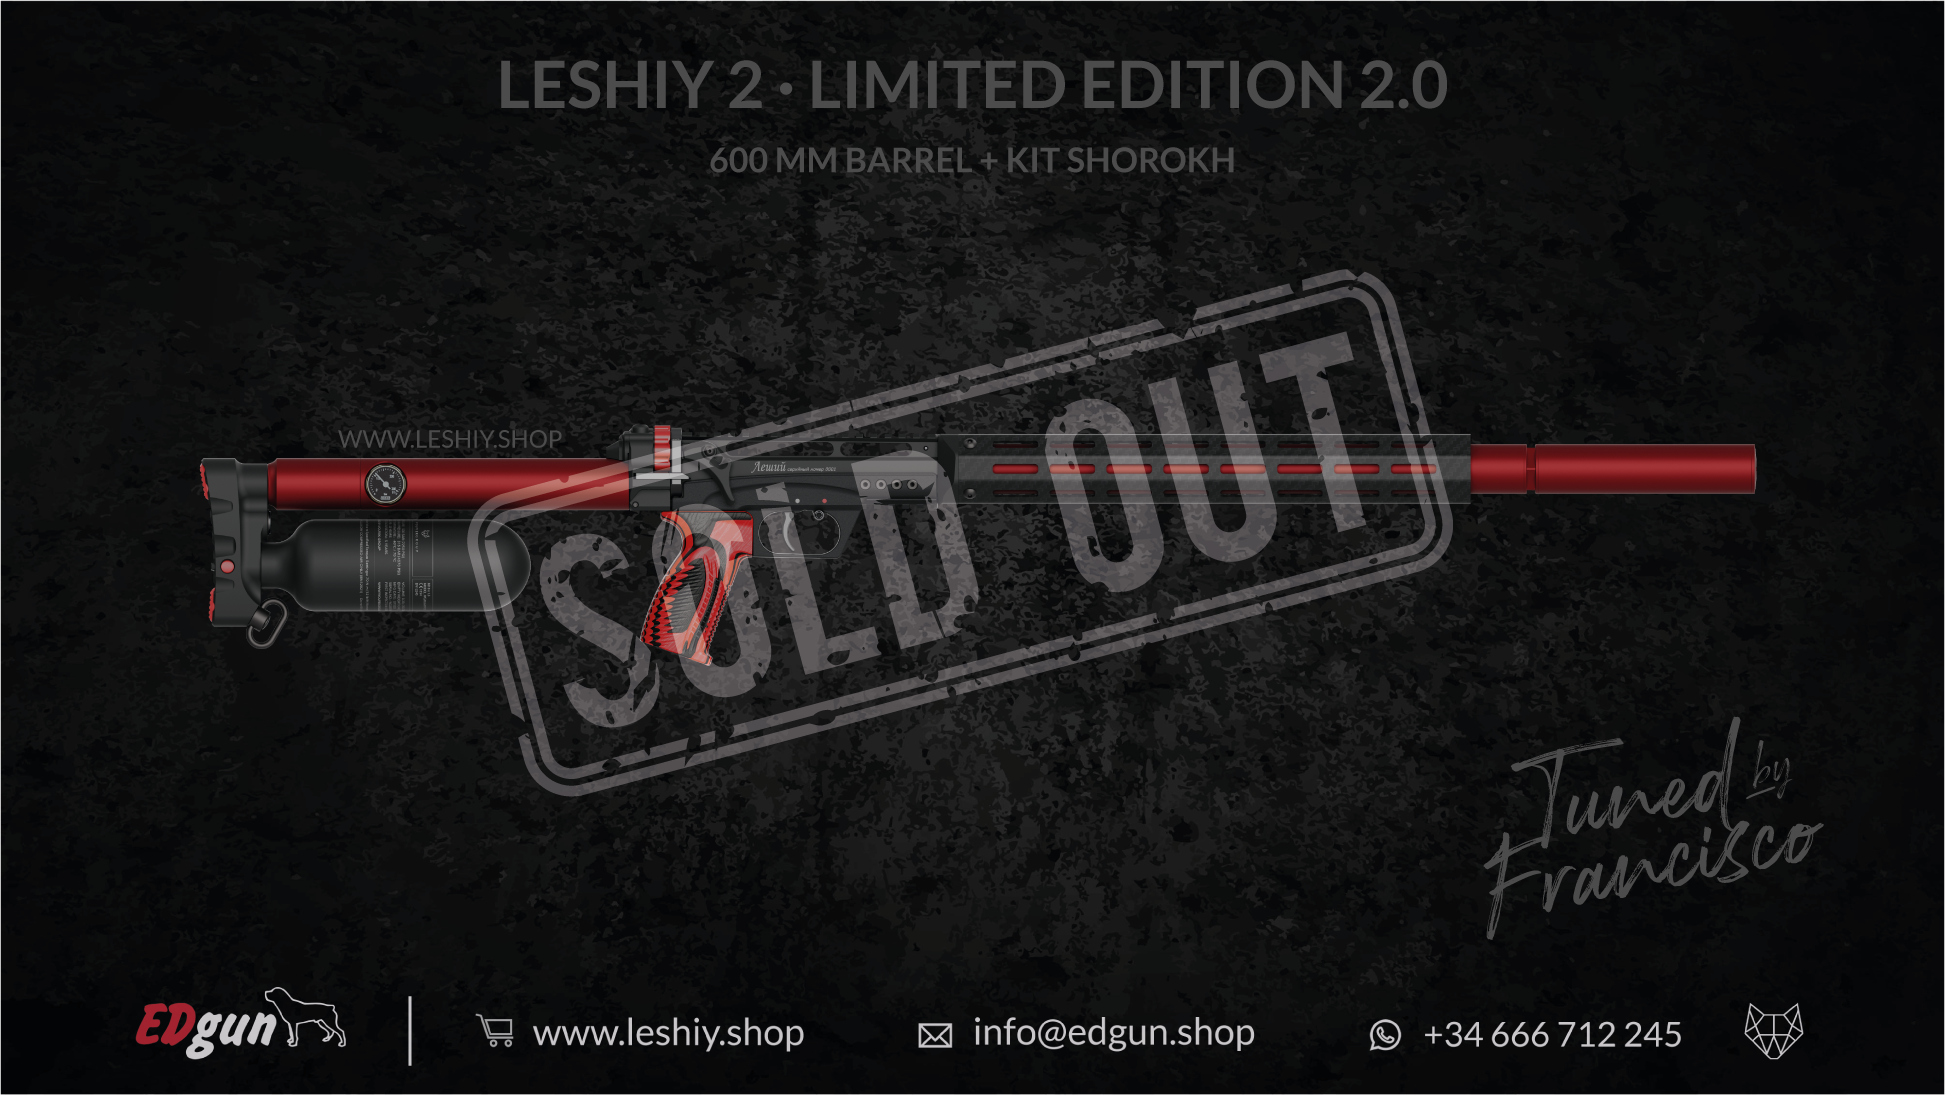 Leshiy 2 Limited Edition 2.0 · Tuned by Francisco